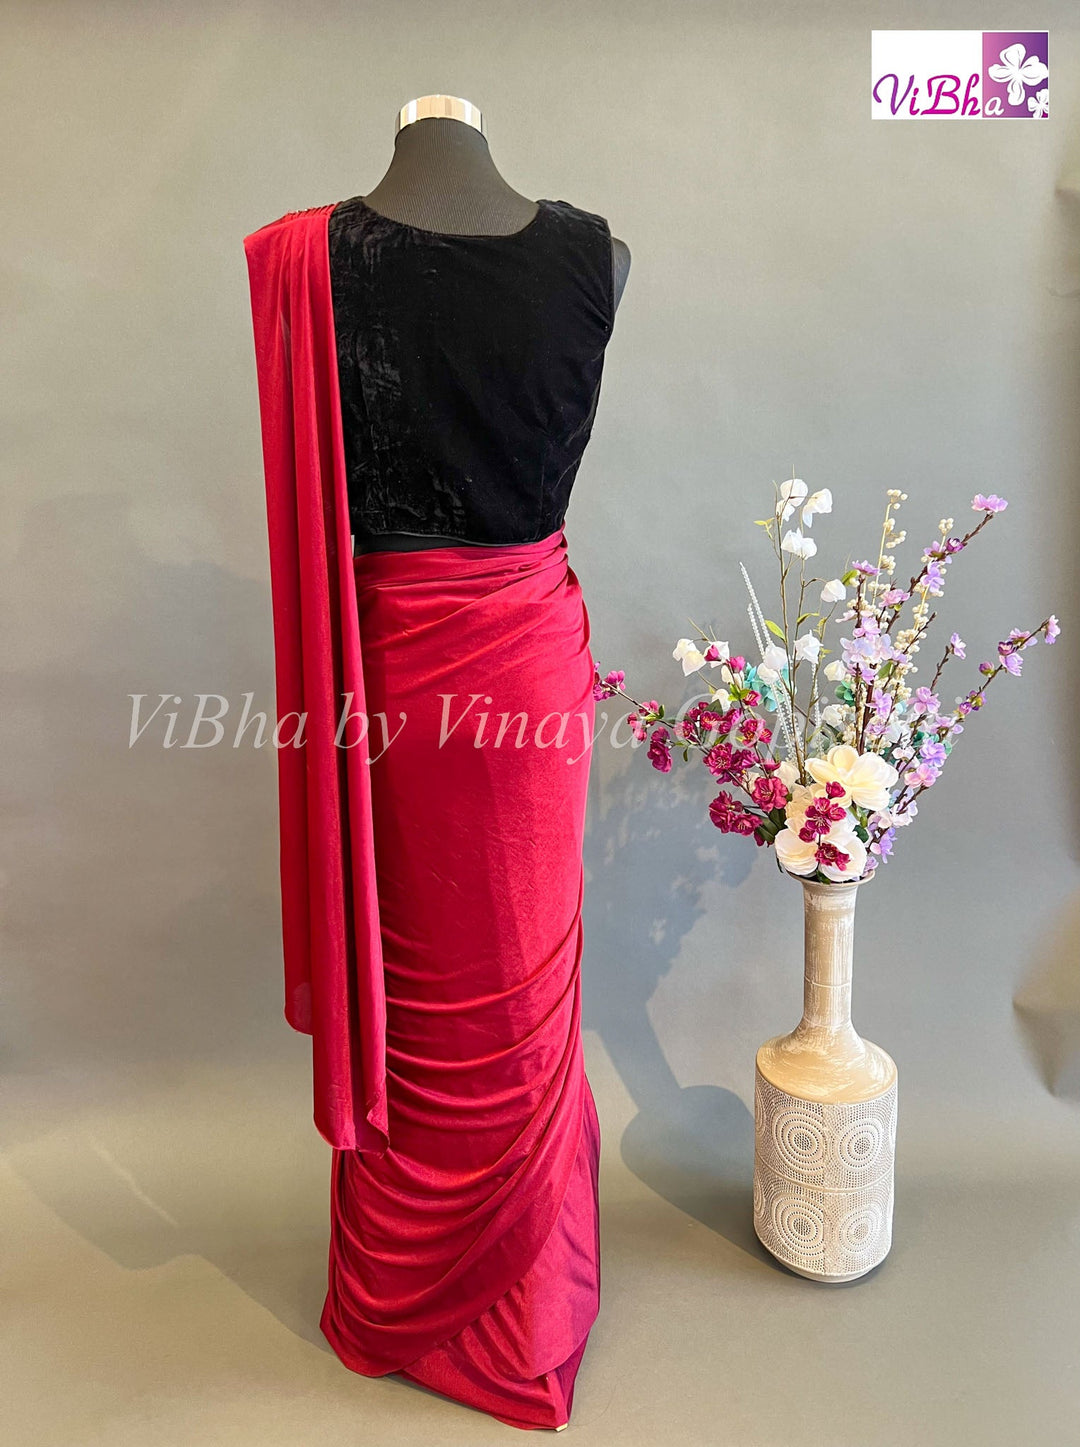 Sarees - Maroon Red And Black Pre Pleated Saree